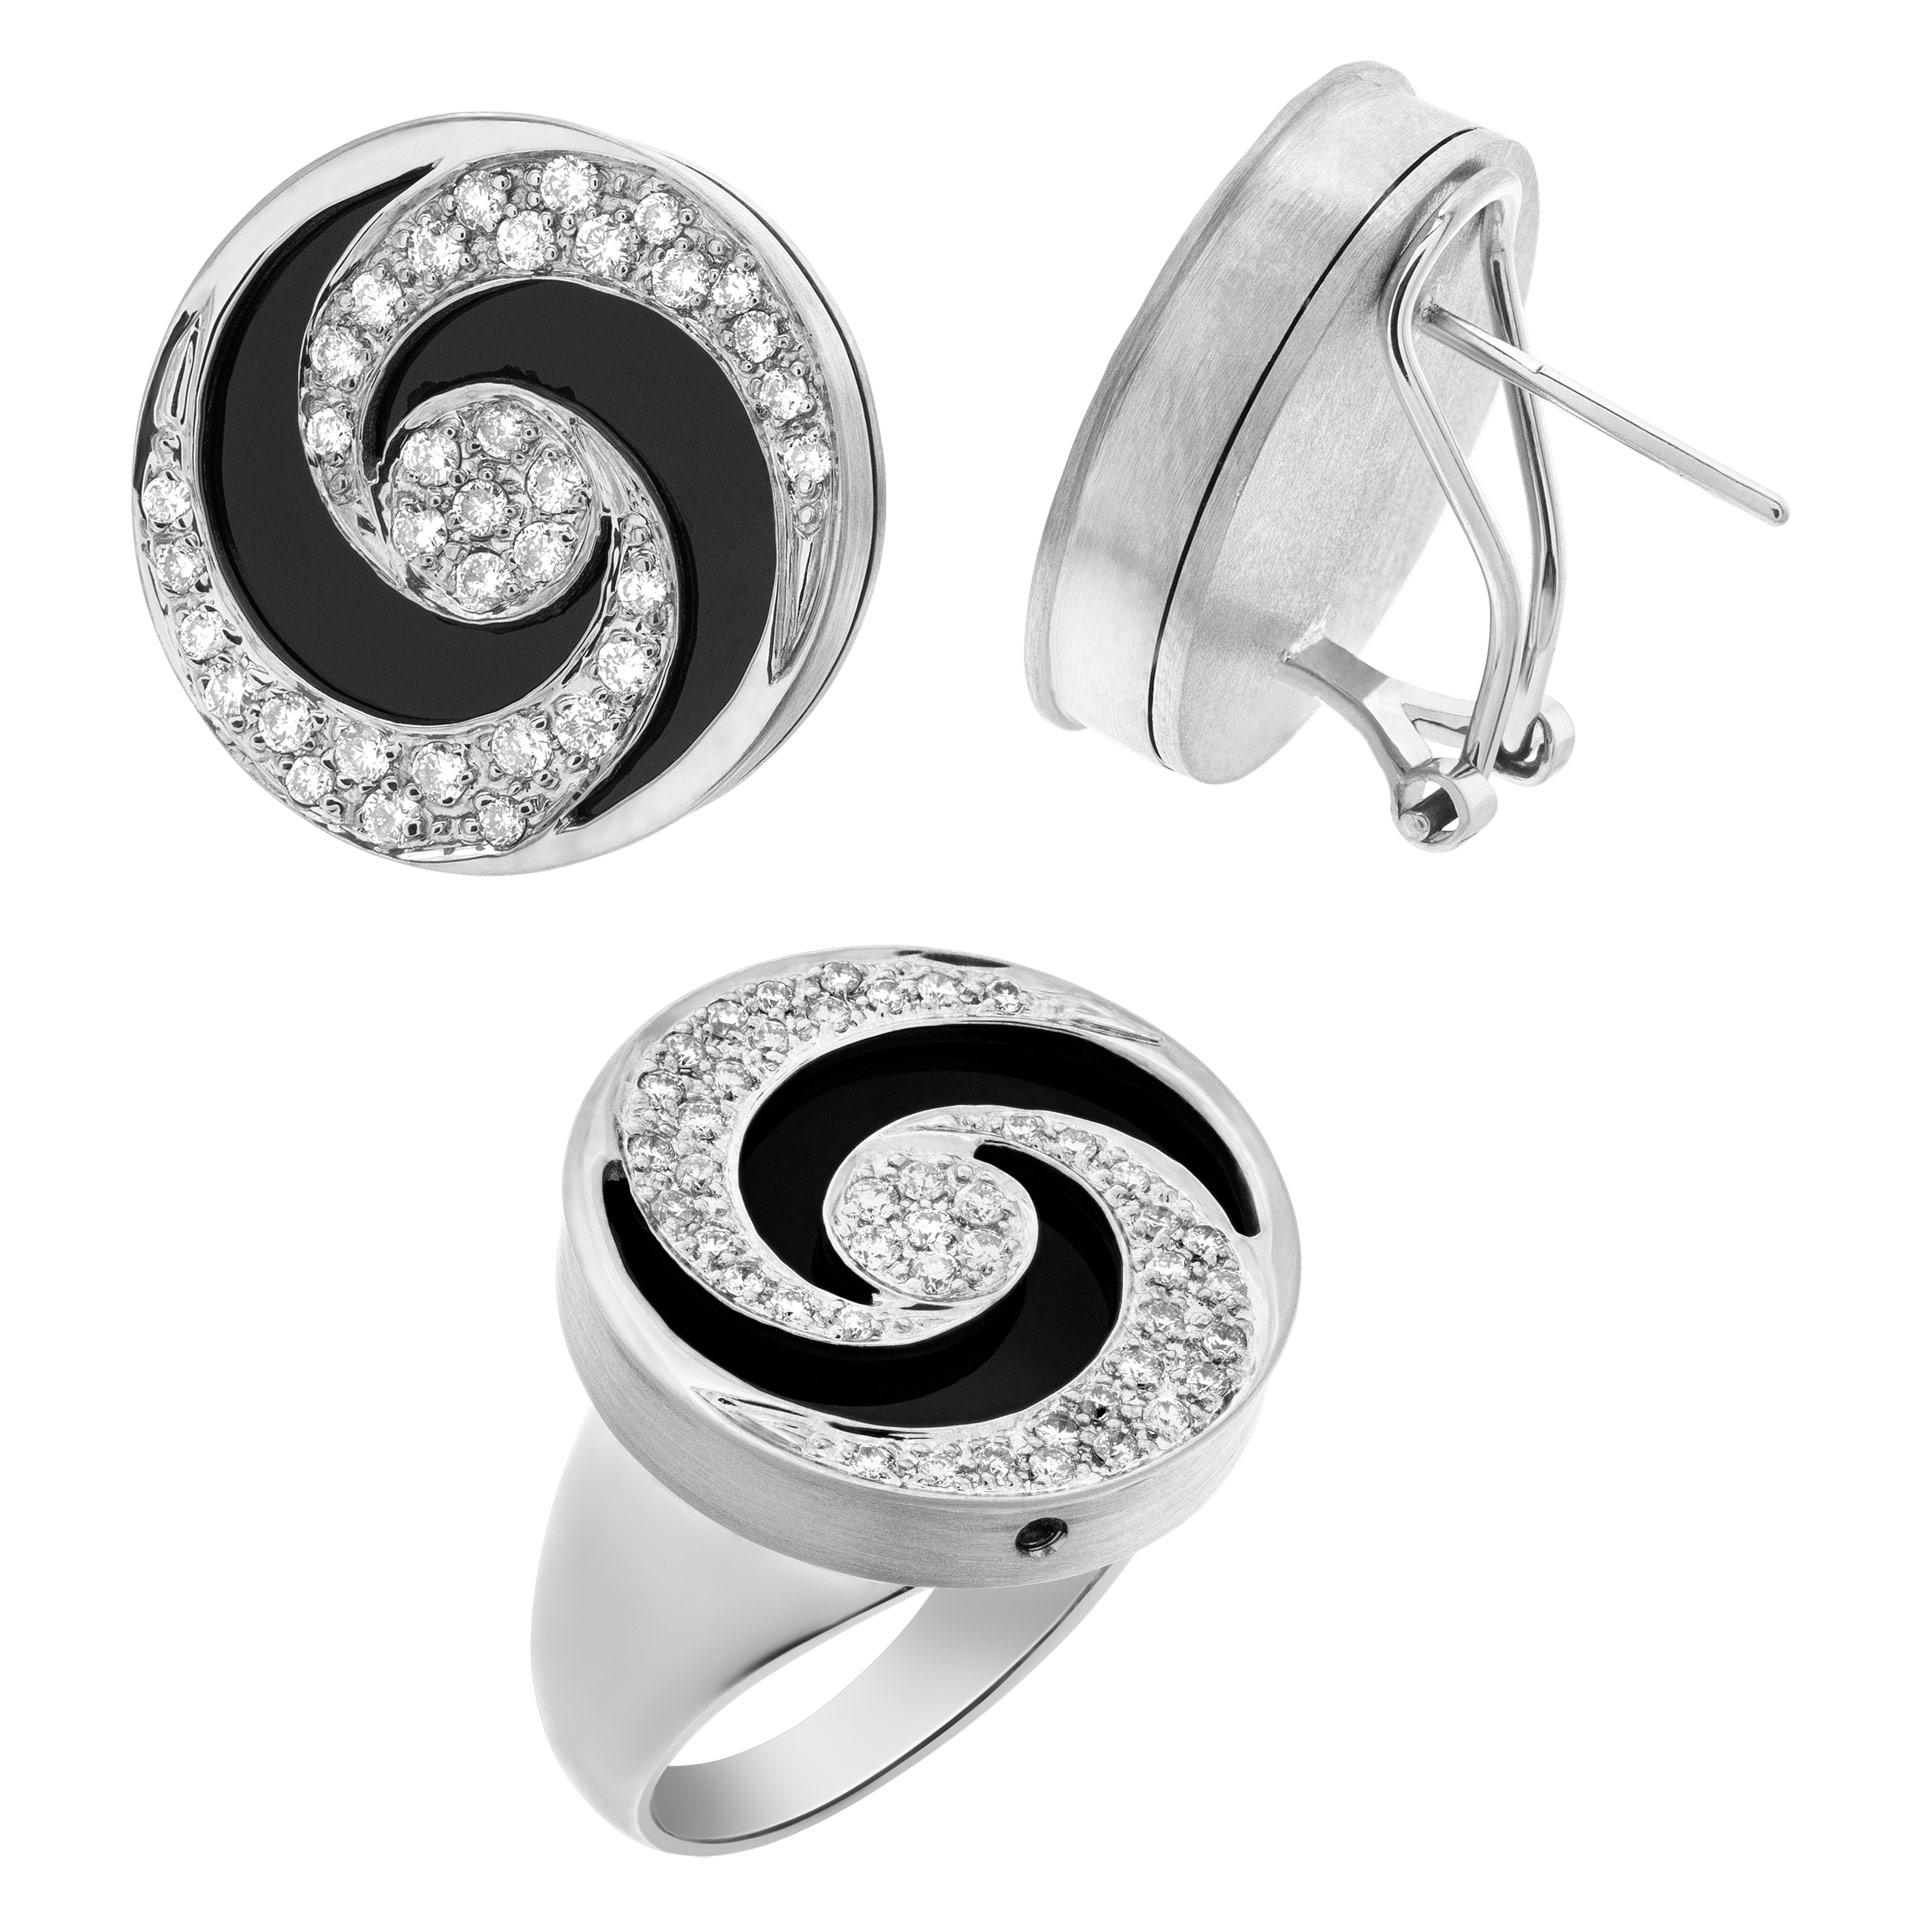 Mesmerizing diamond and black onyx swirl earring and ring 3 pieces set in 18K white gold.